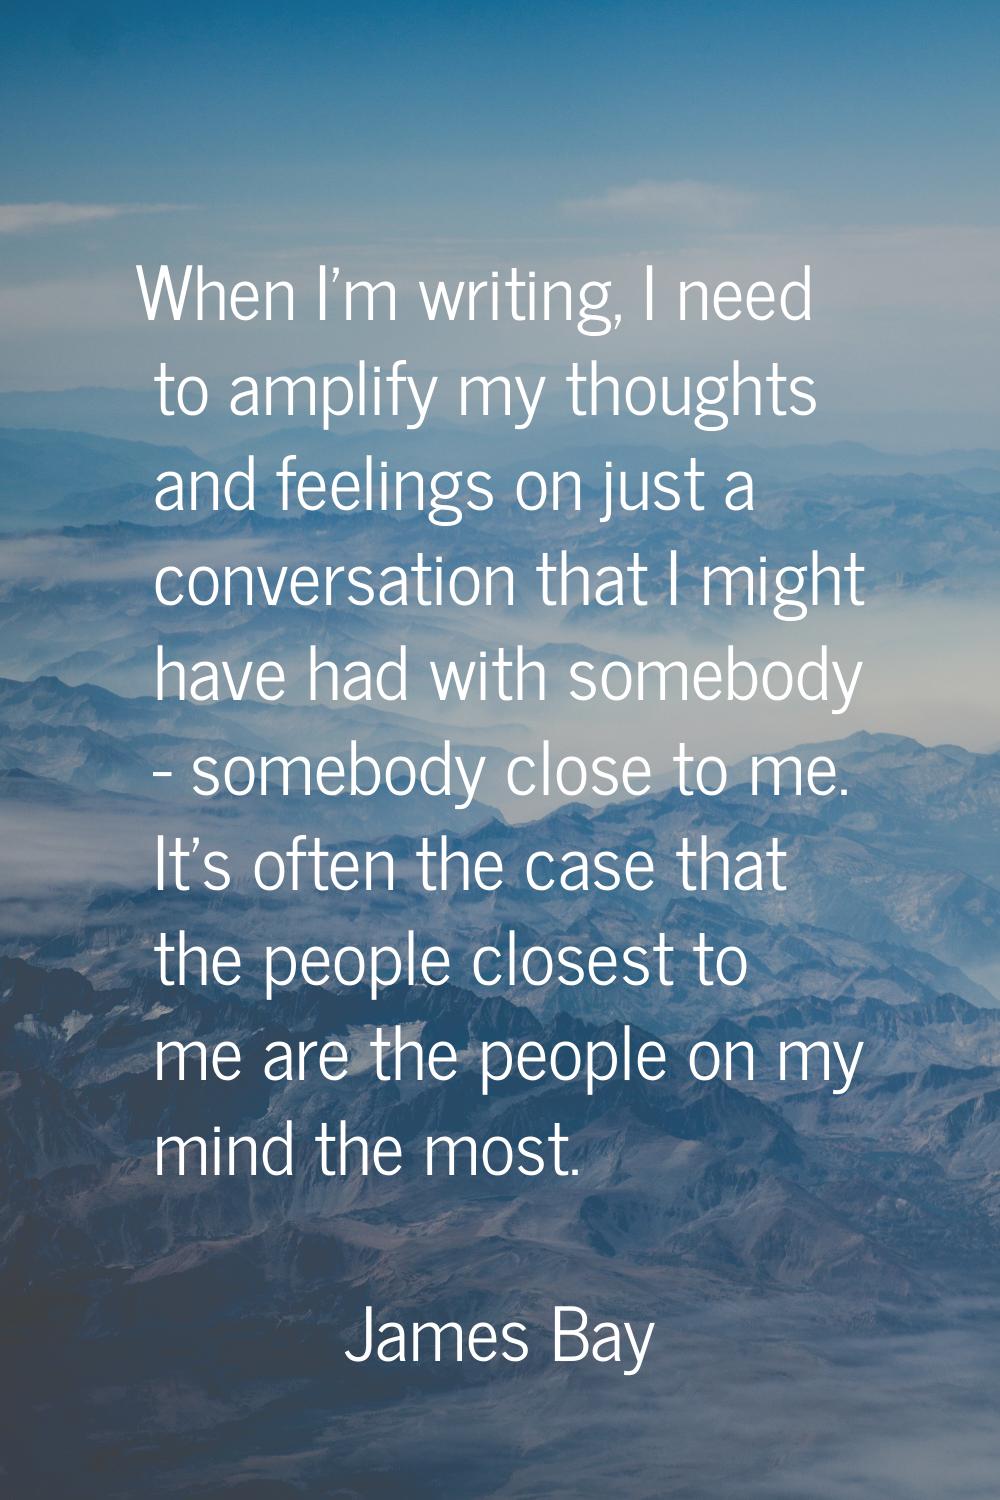 When I'm writing, I need to amplify my thoughts and feelings on just a conversation that I might ha